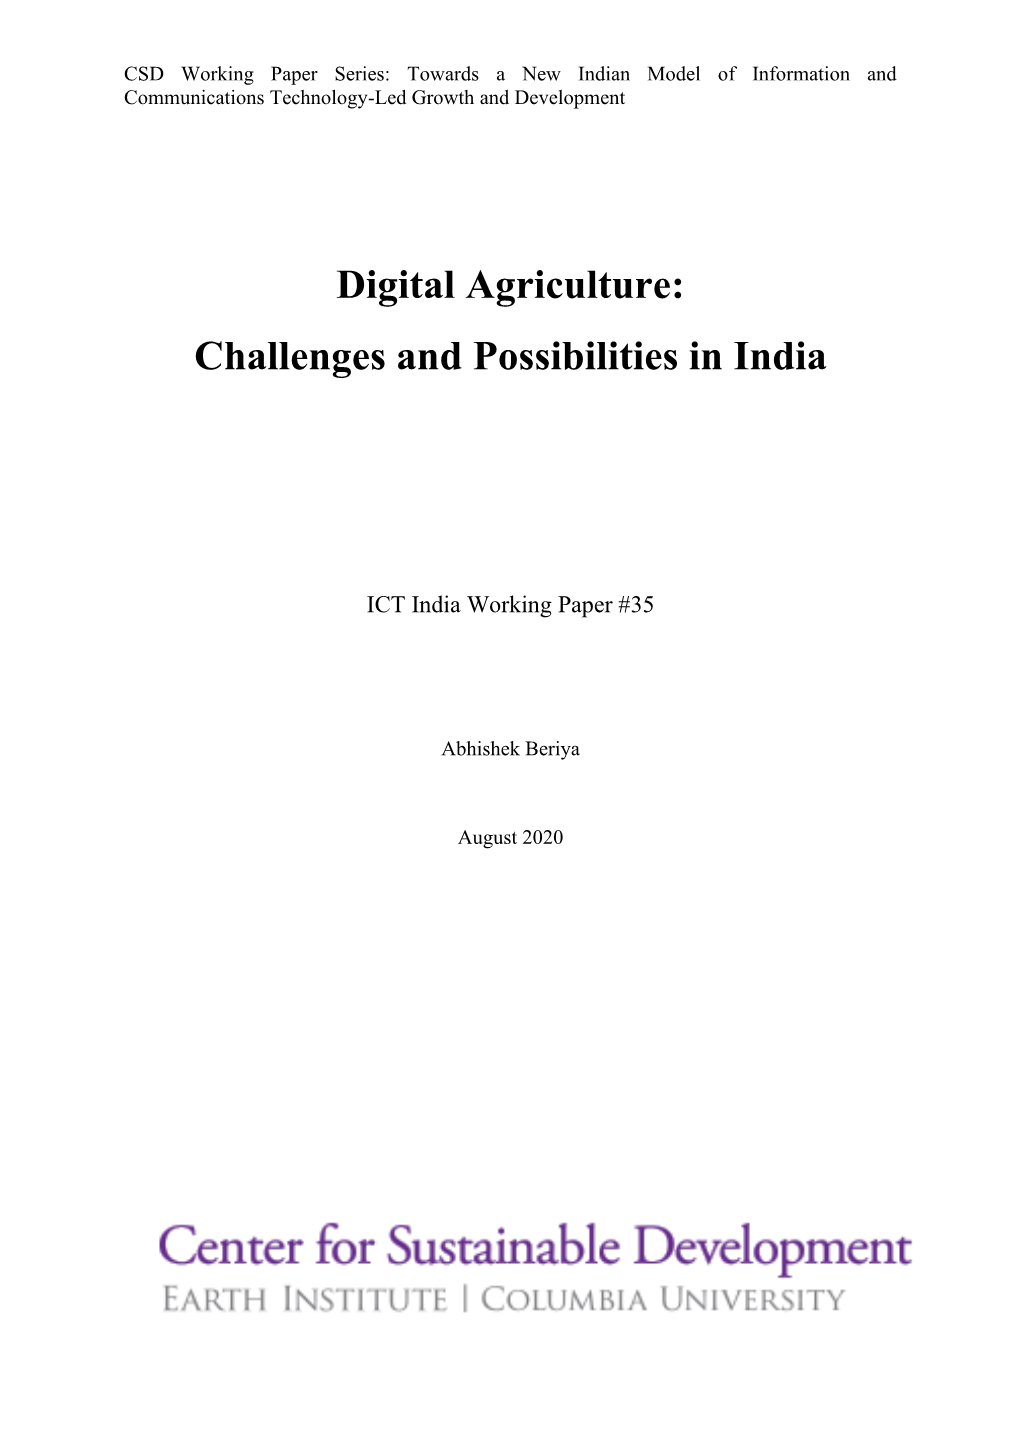 Digital Agriculture: Challenges and Possibilities in India